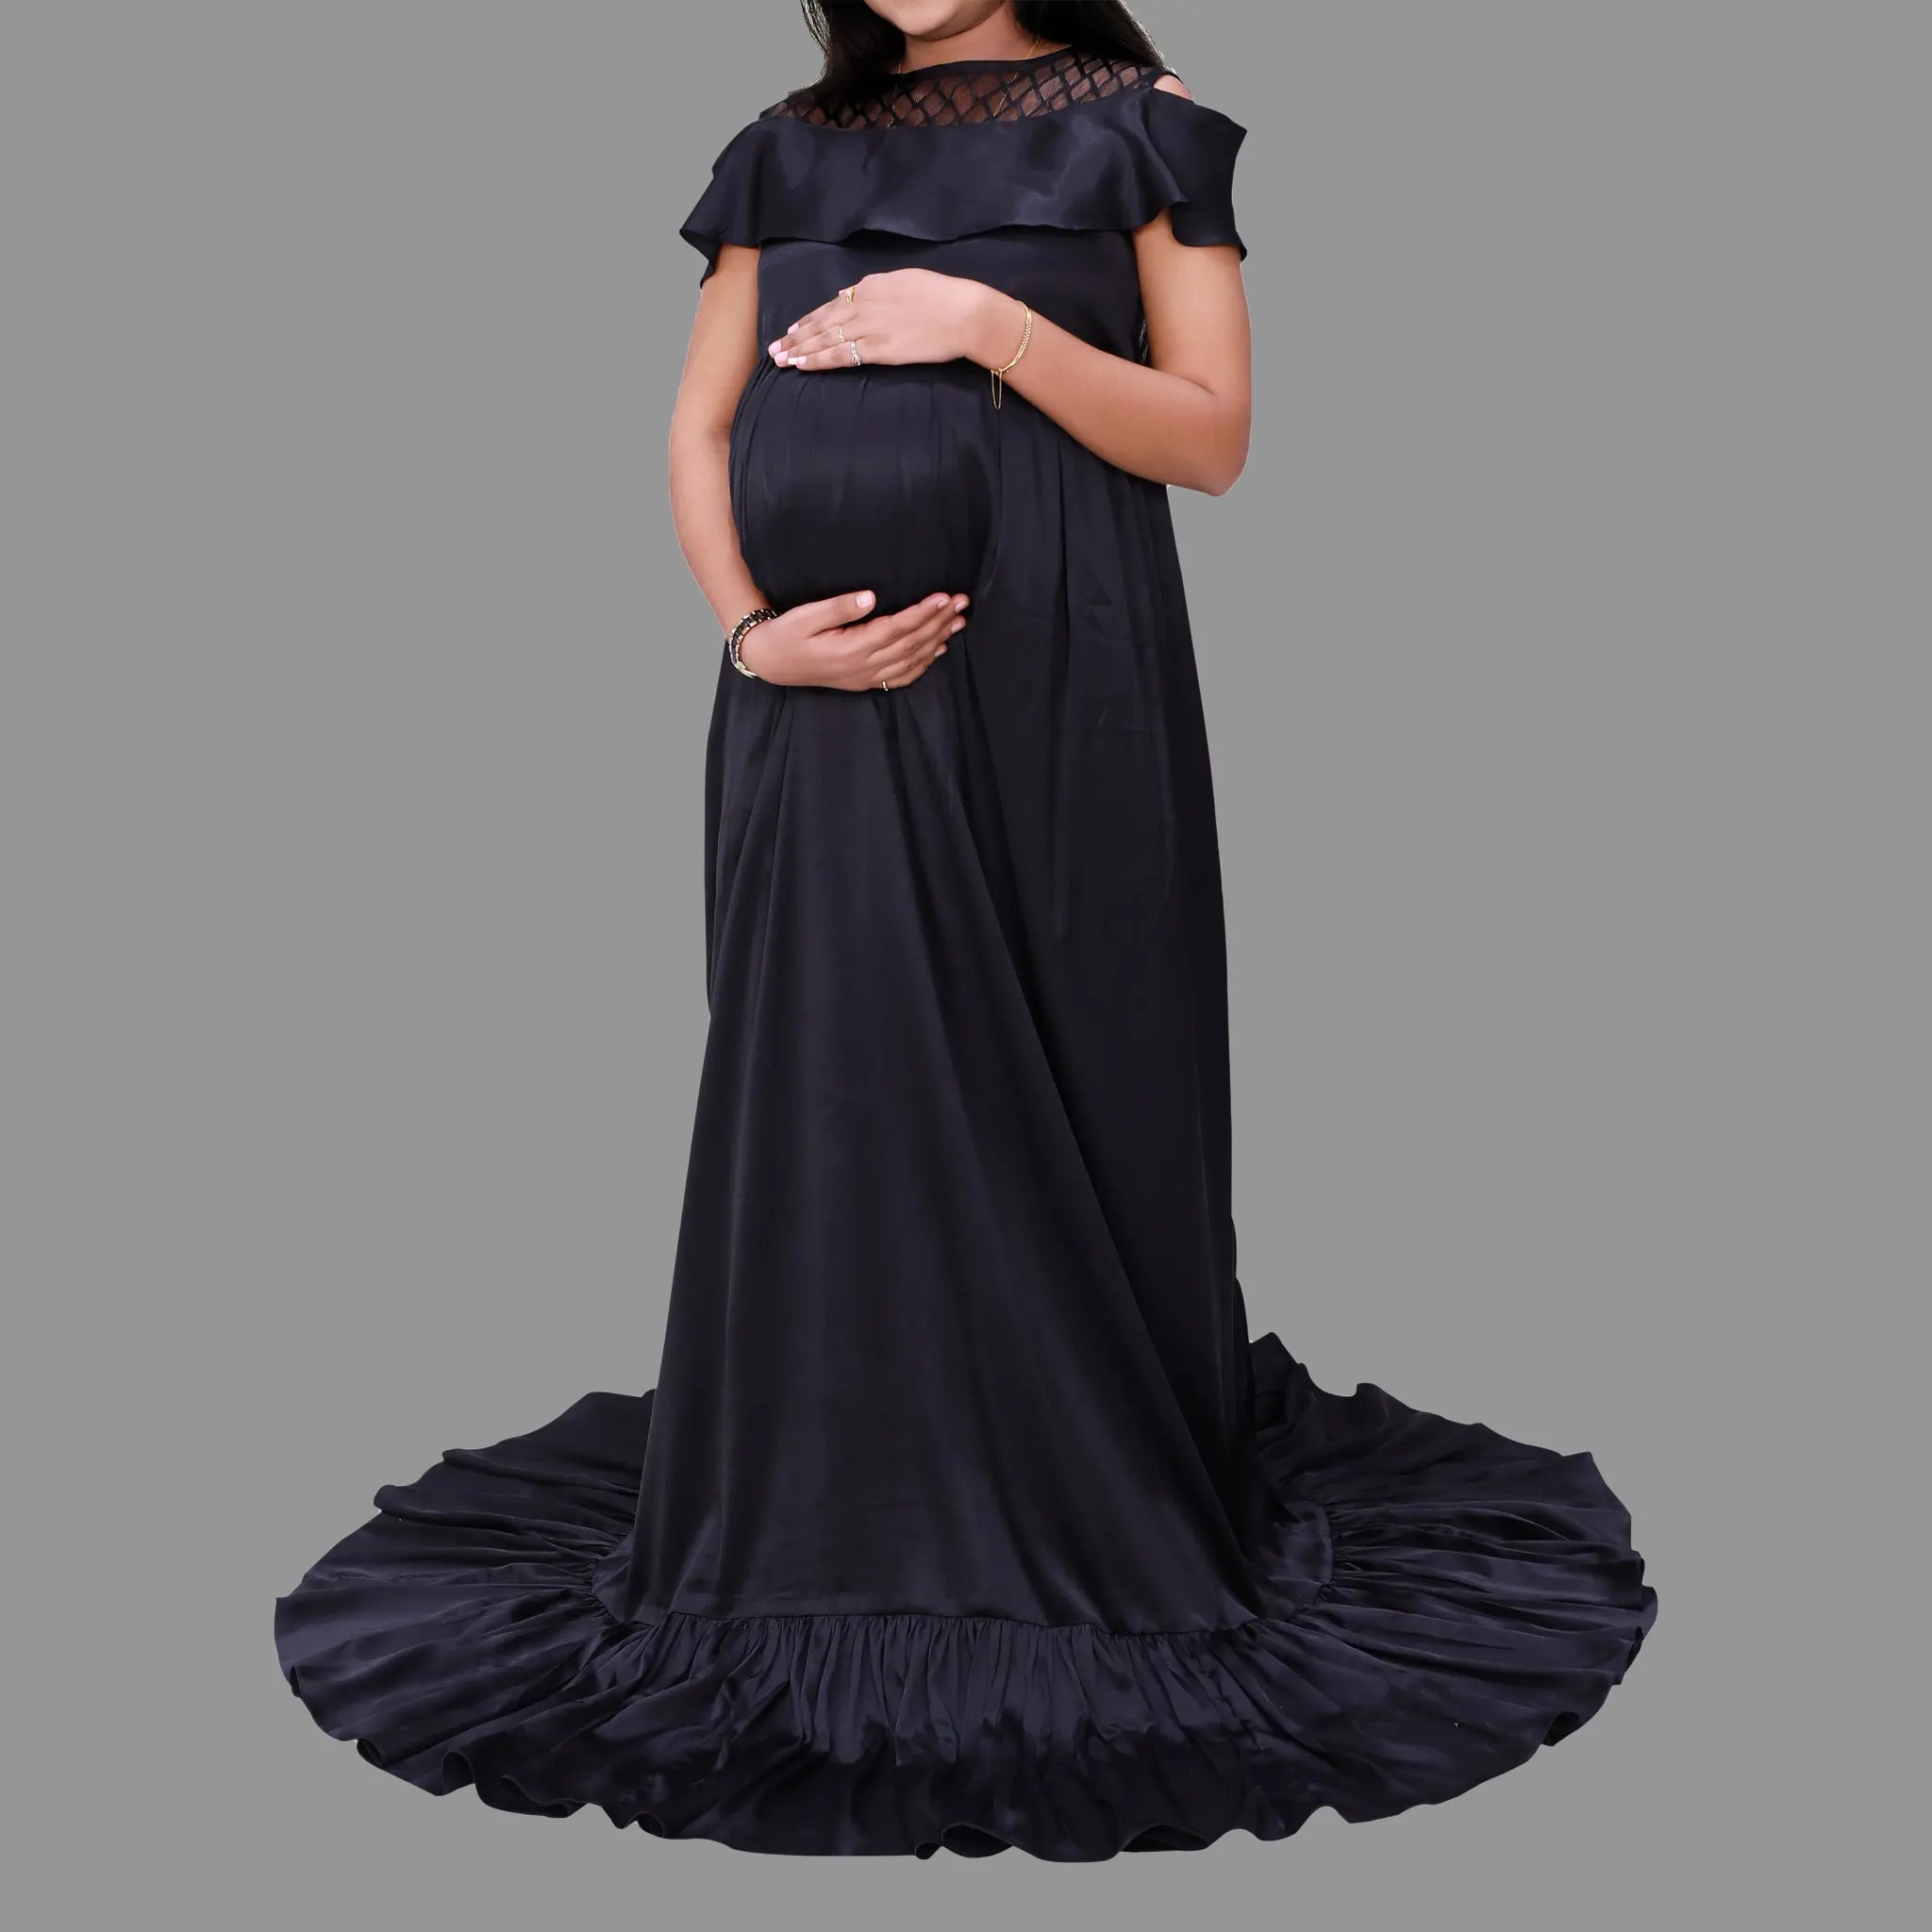 Buy JustVH Women's Floor Length Maternity Gown For Photoshoot (A Green_S)  at Amazon.in